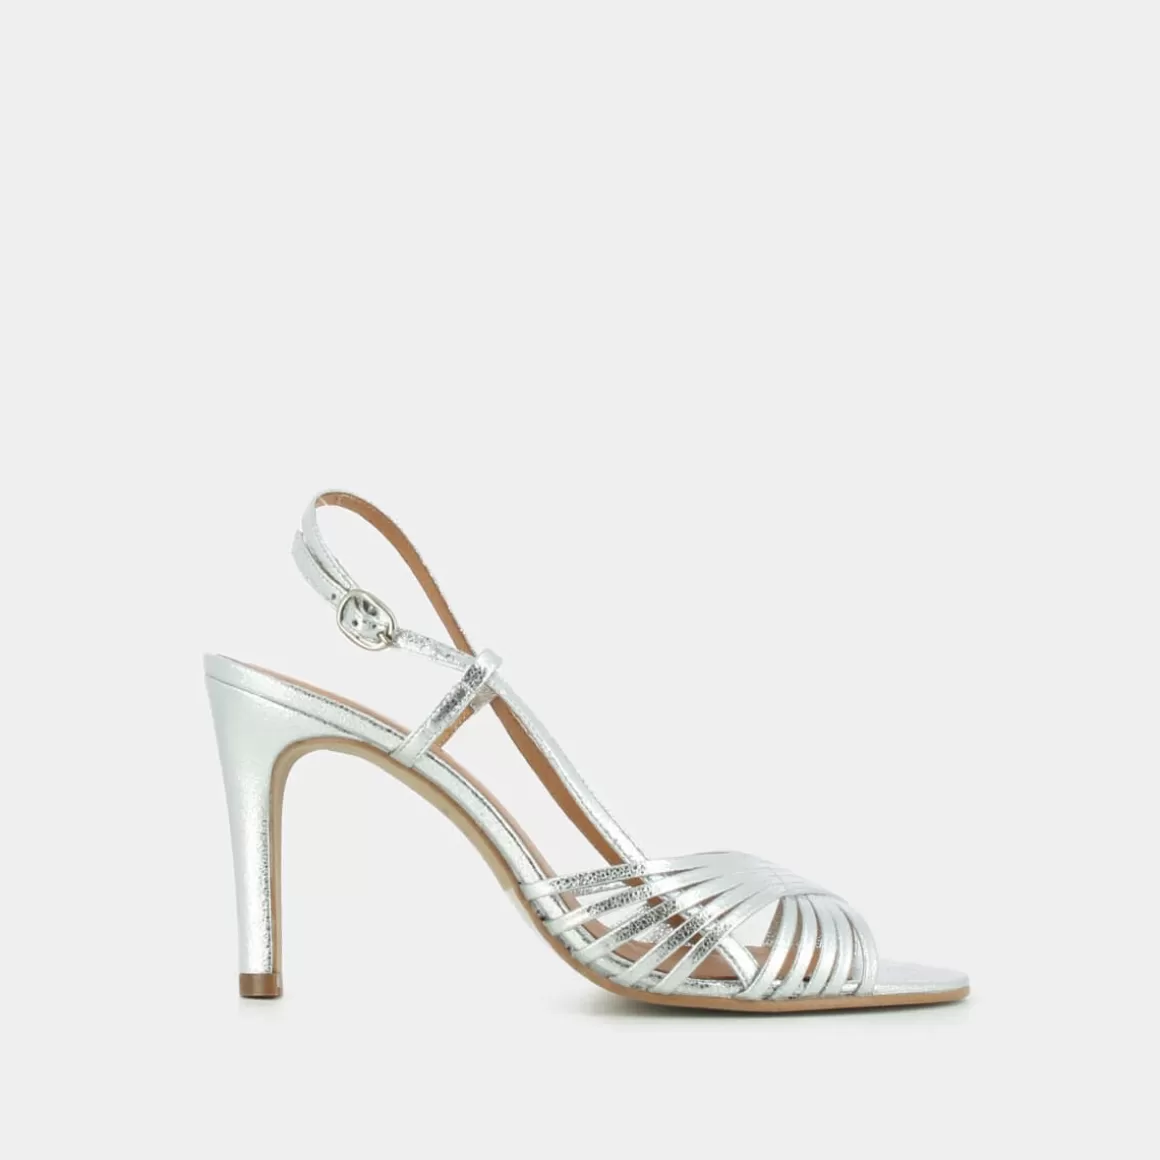 Heeled and strappy sandals<Jonak Best Sale